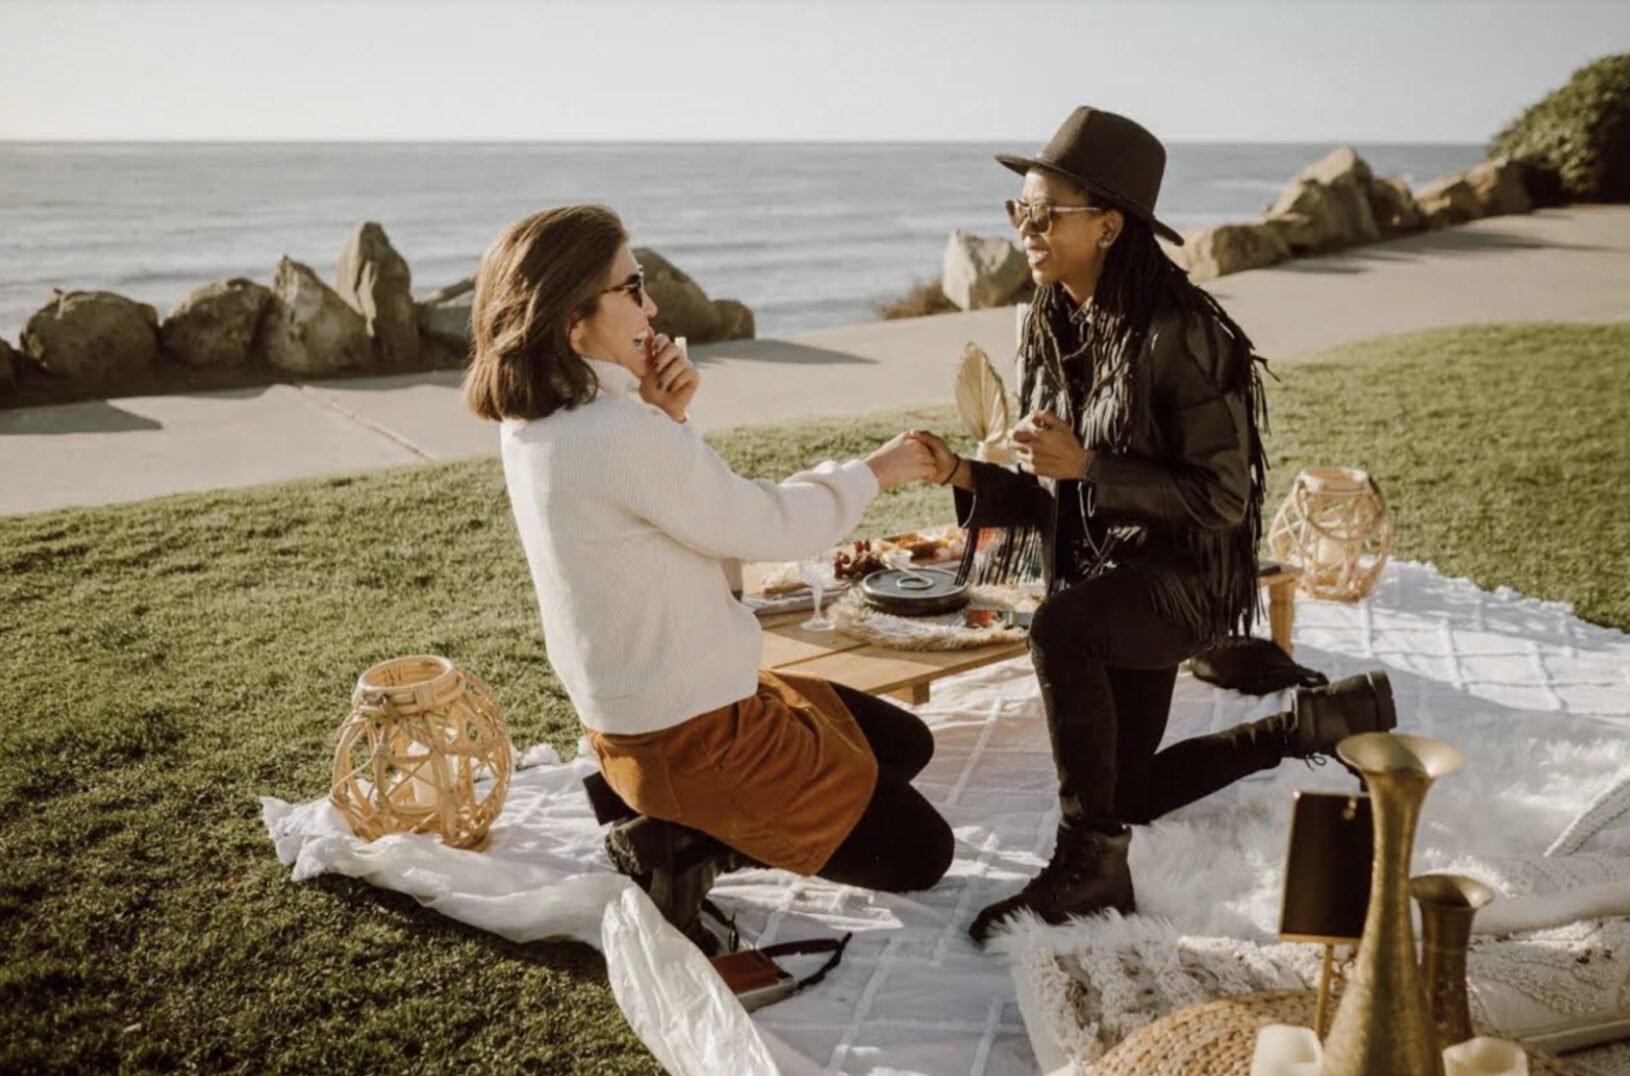 Man proposing to a woman on a blanket near the ocean, enjoying a peaceful moment together.